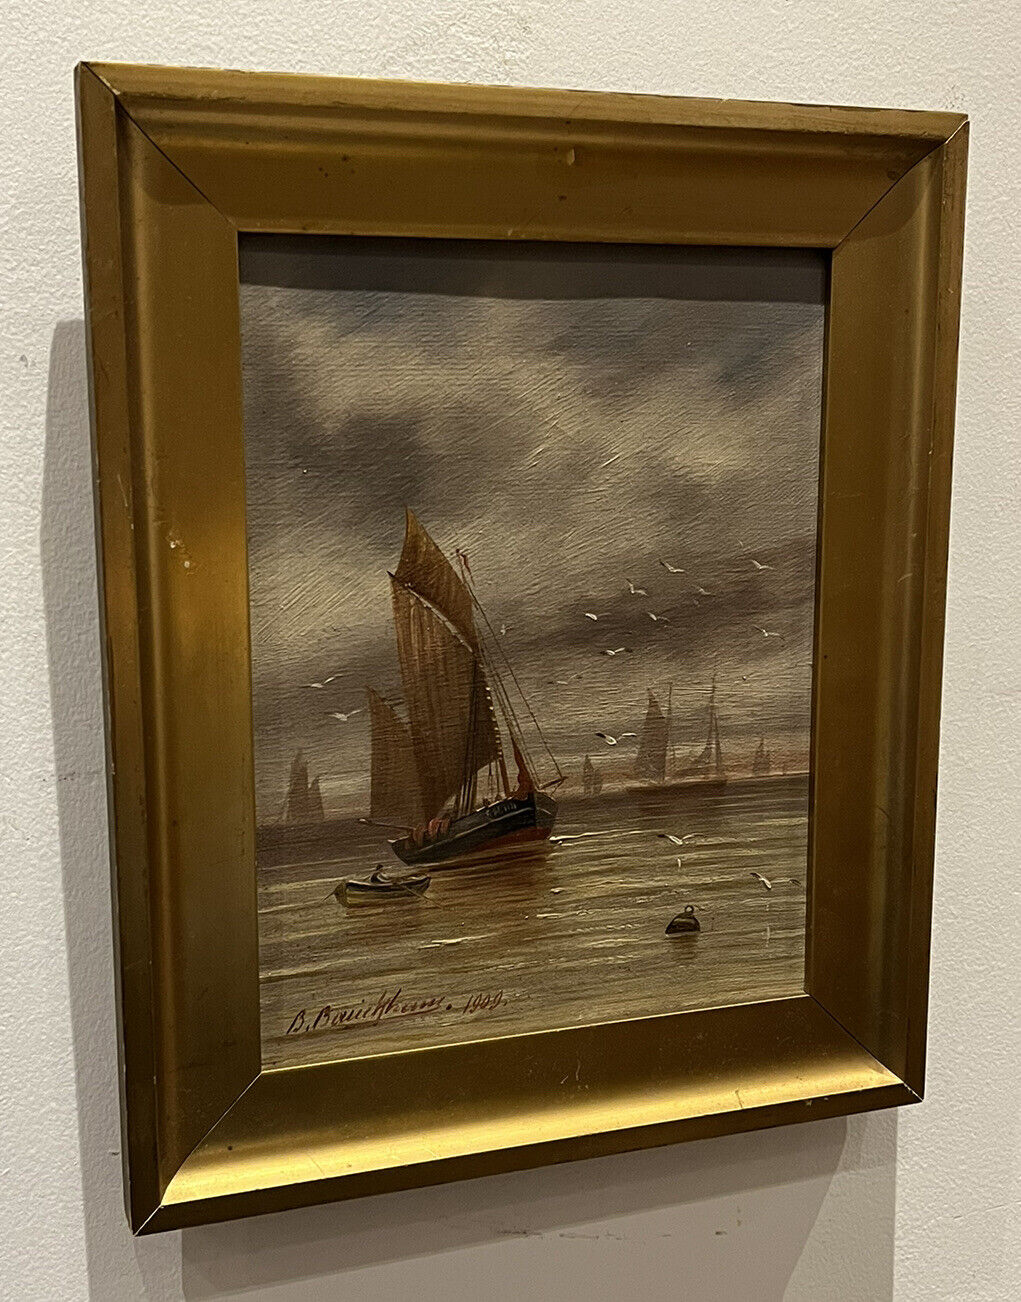 Maritime Oil Painting, Signed And Dated 1909